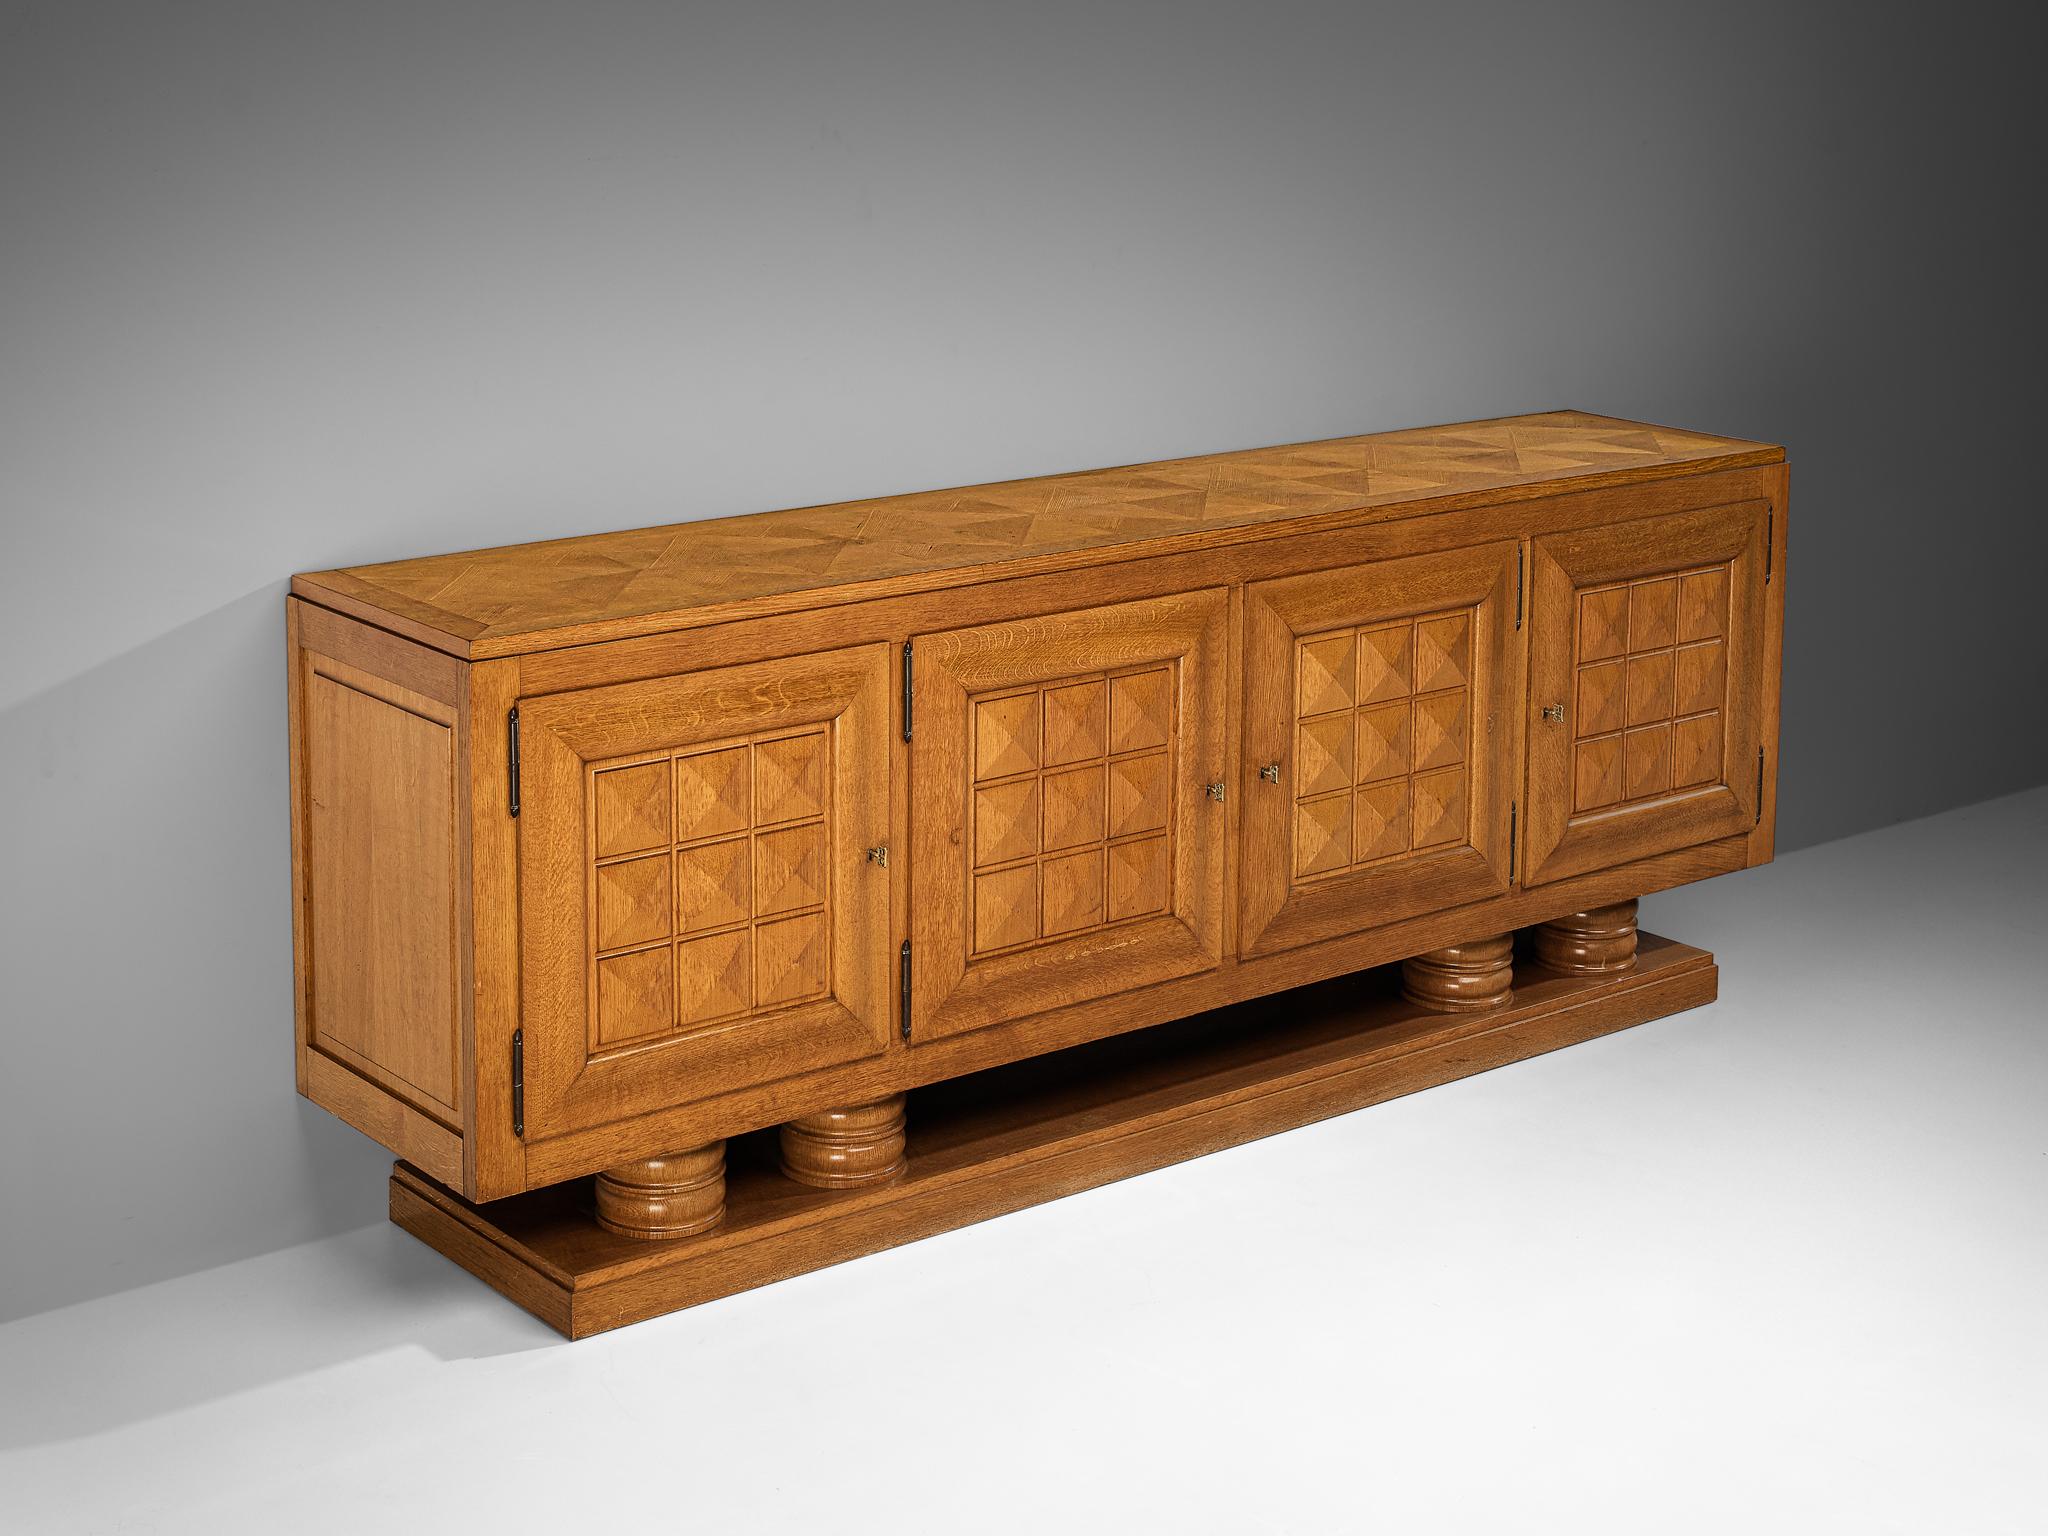 Gaston Poisson, sideboard, oak, oak veneer, France, 1940s

Crafted by French designer Gaston Poisson within the realm of Art Deco, this sideboard is a testament to the designer's exceptional craftsmanship and great eye for detail. The doorpanels